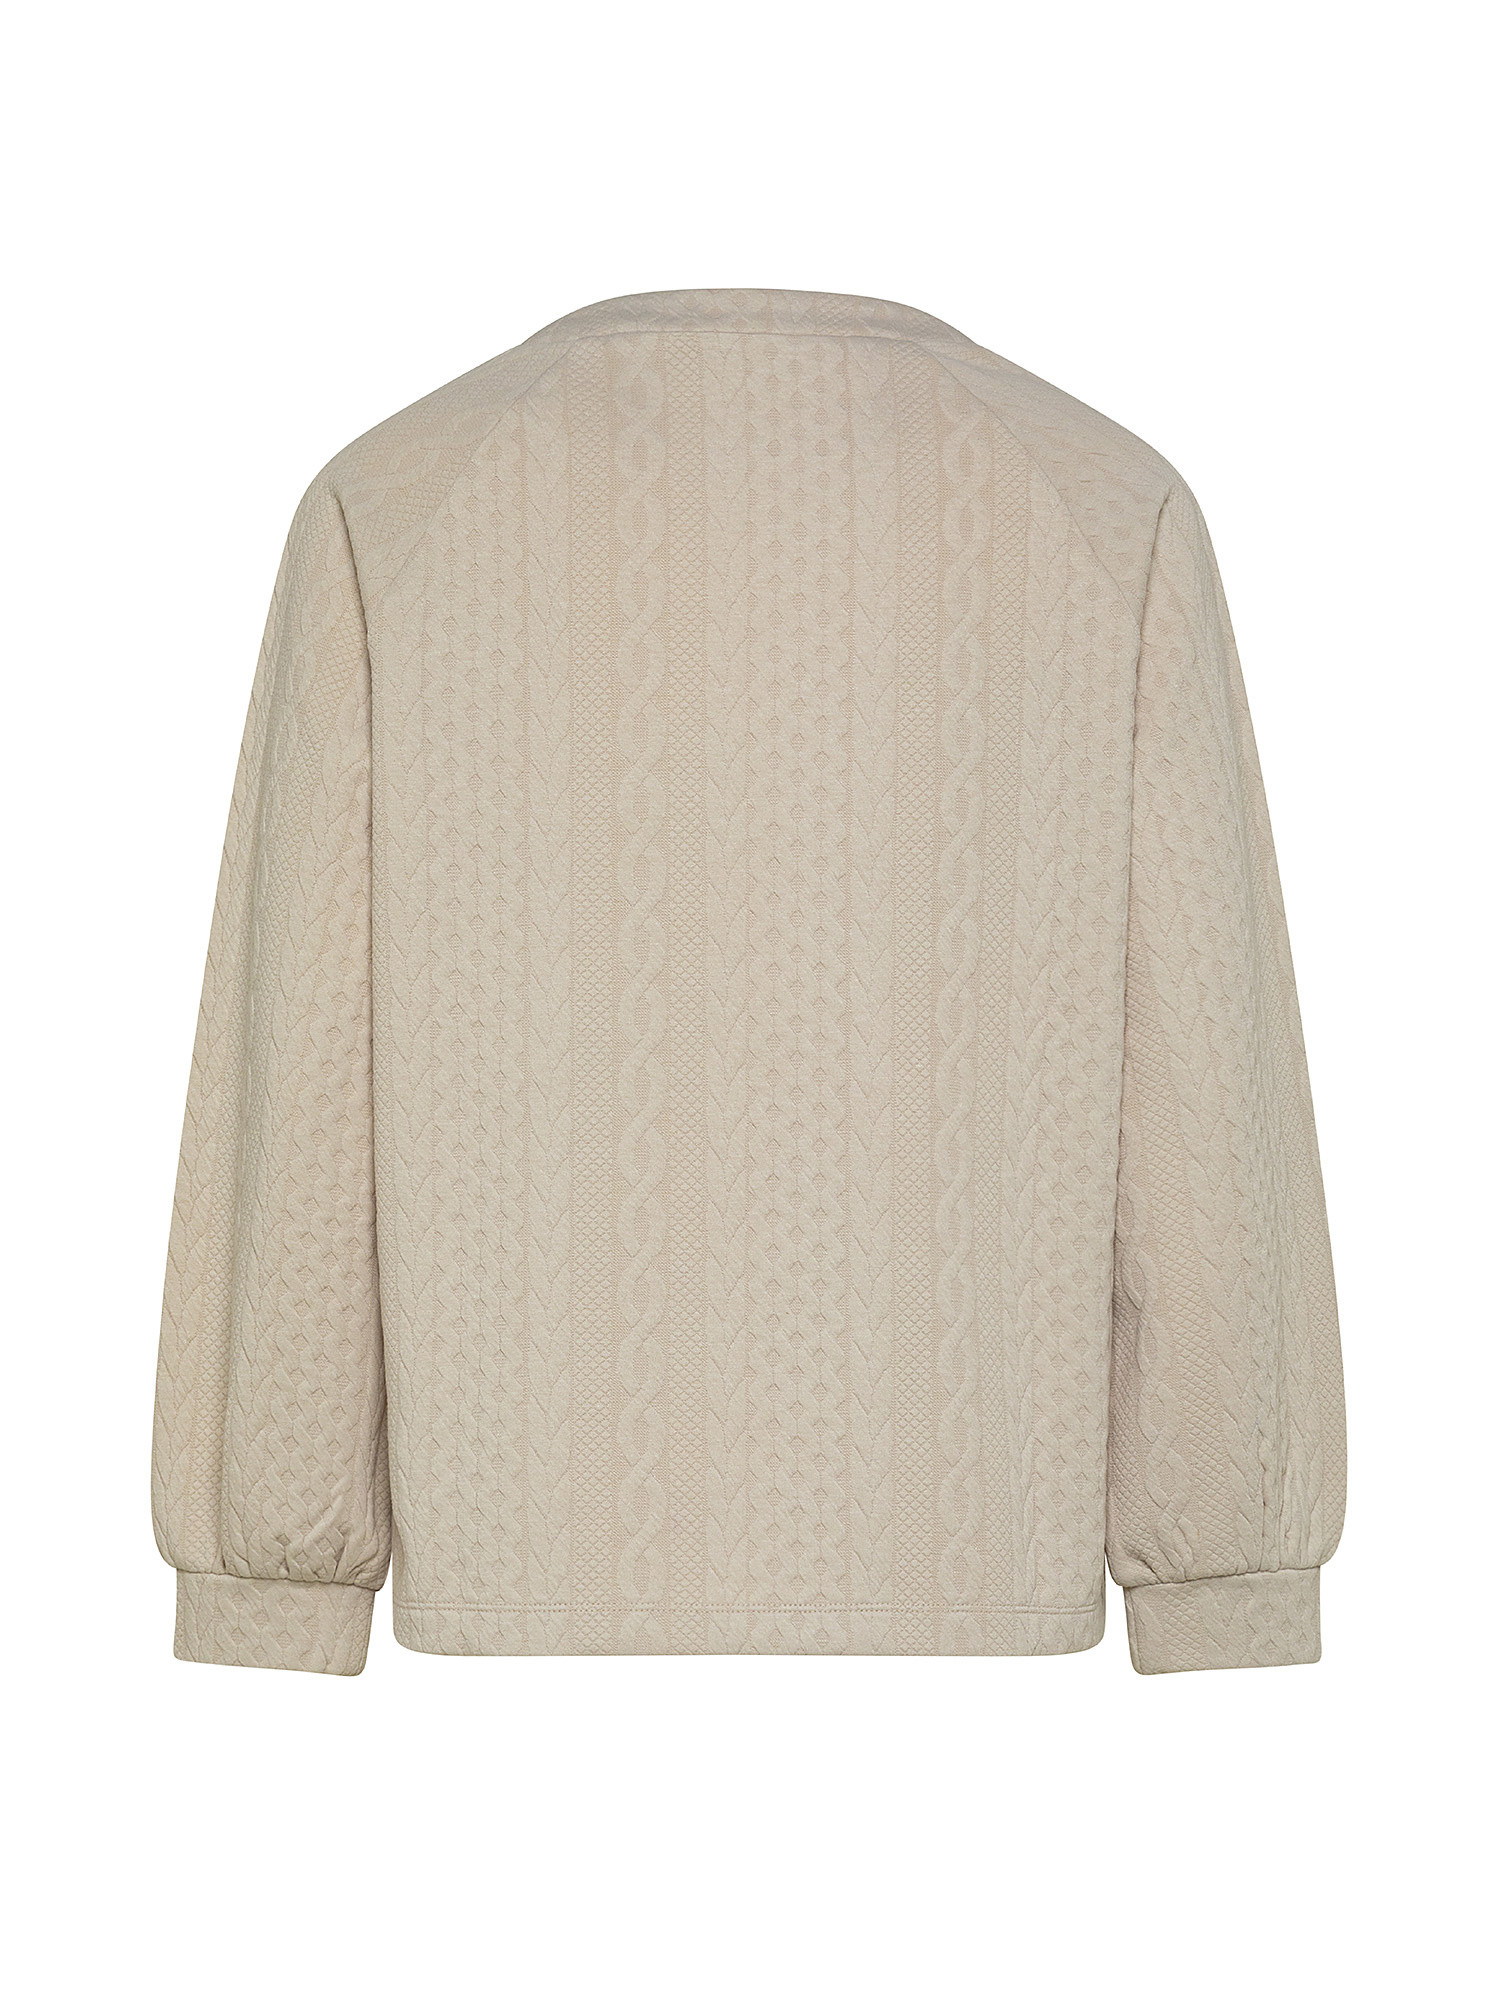 Sweater with pattern, Beige, large image number 1